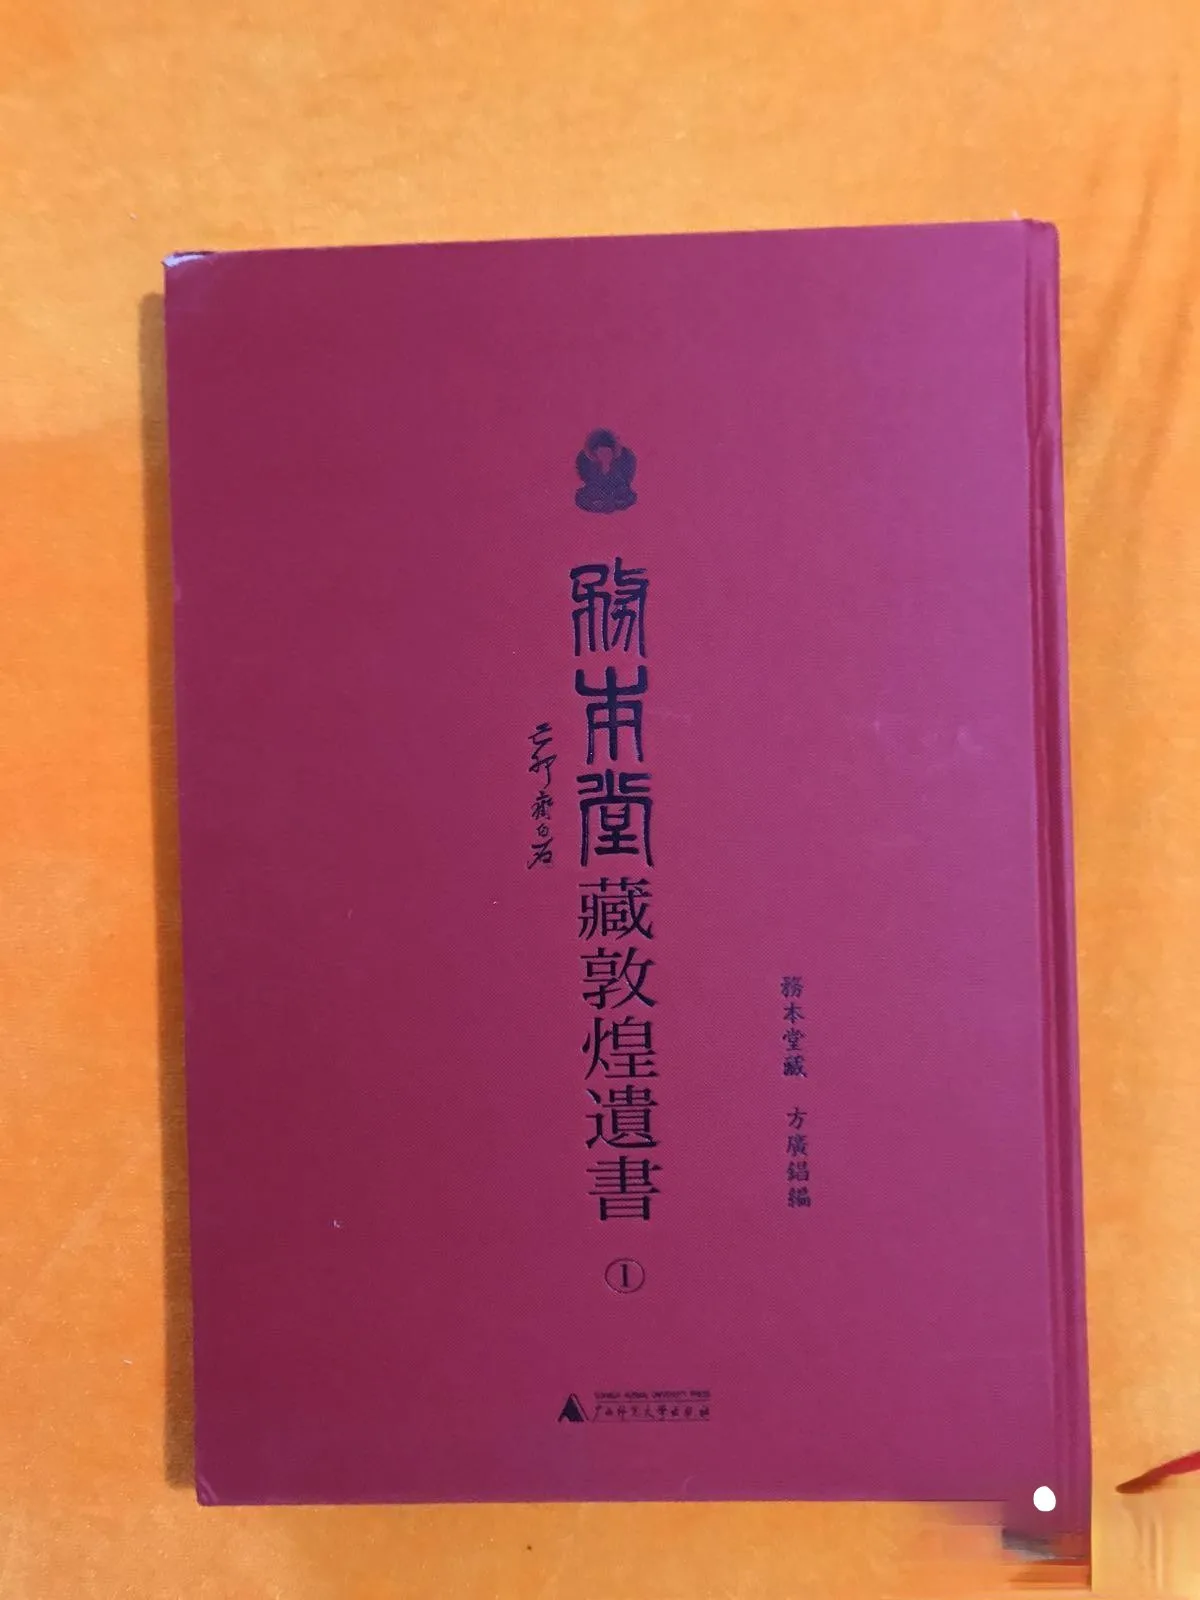 The Dunhuang Posthumous Manuscripts in the Wubentang Collection (Volume 1)